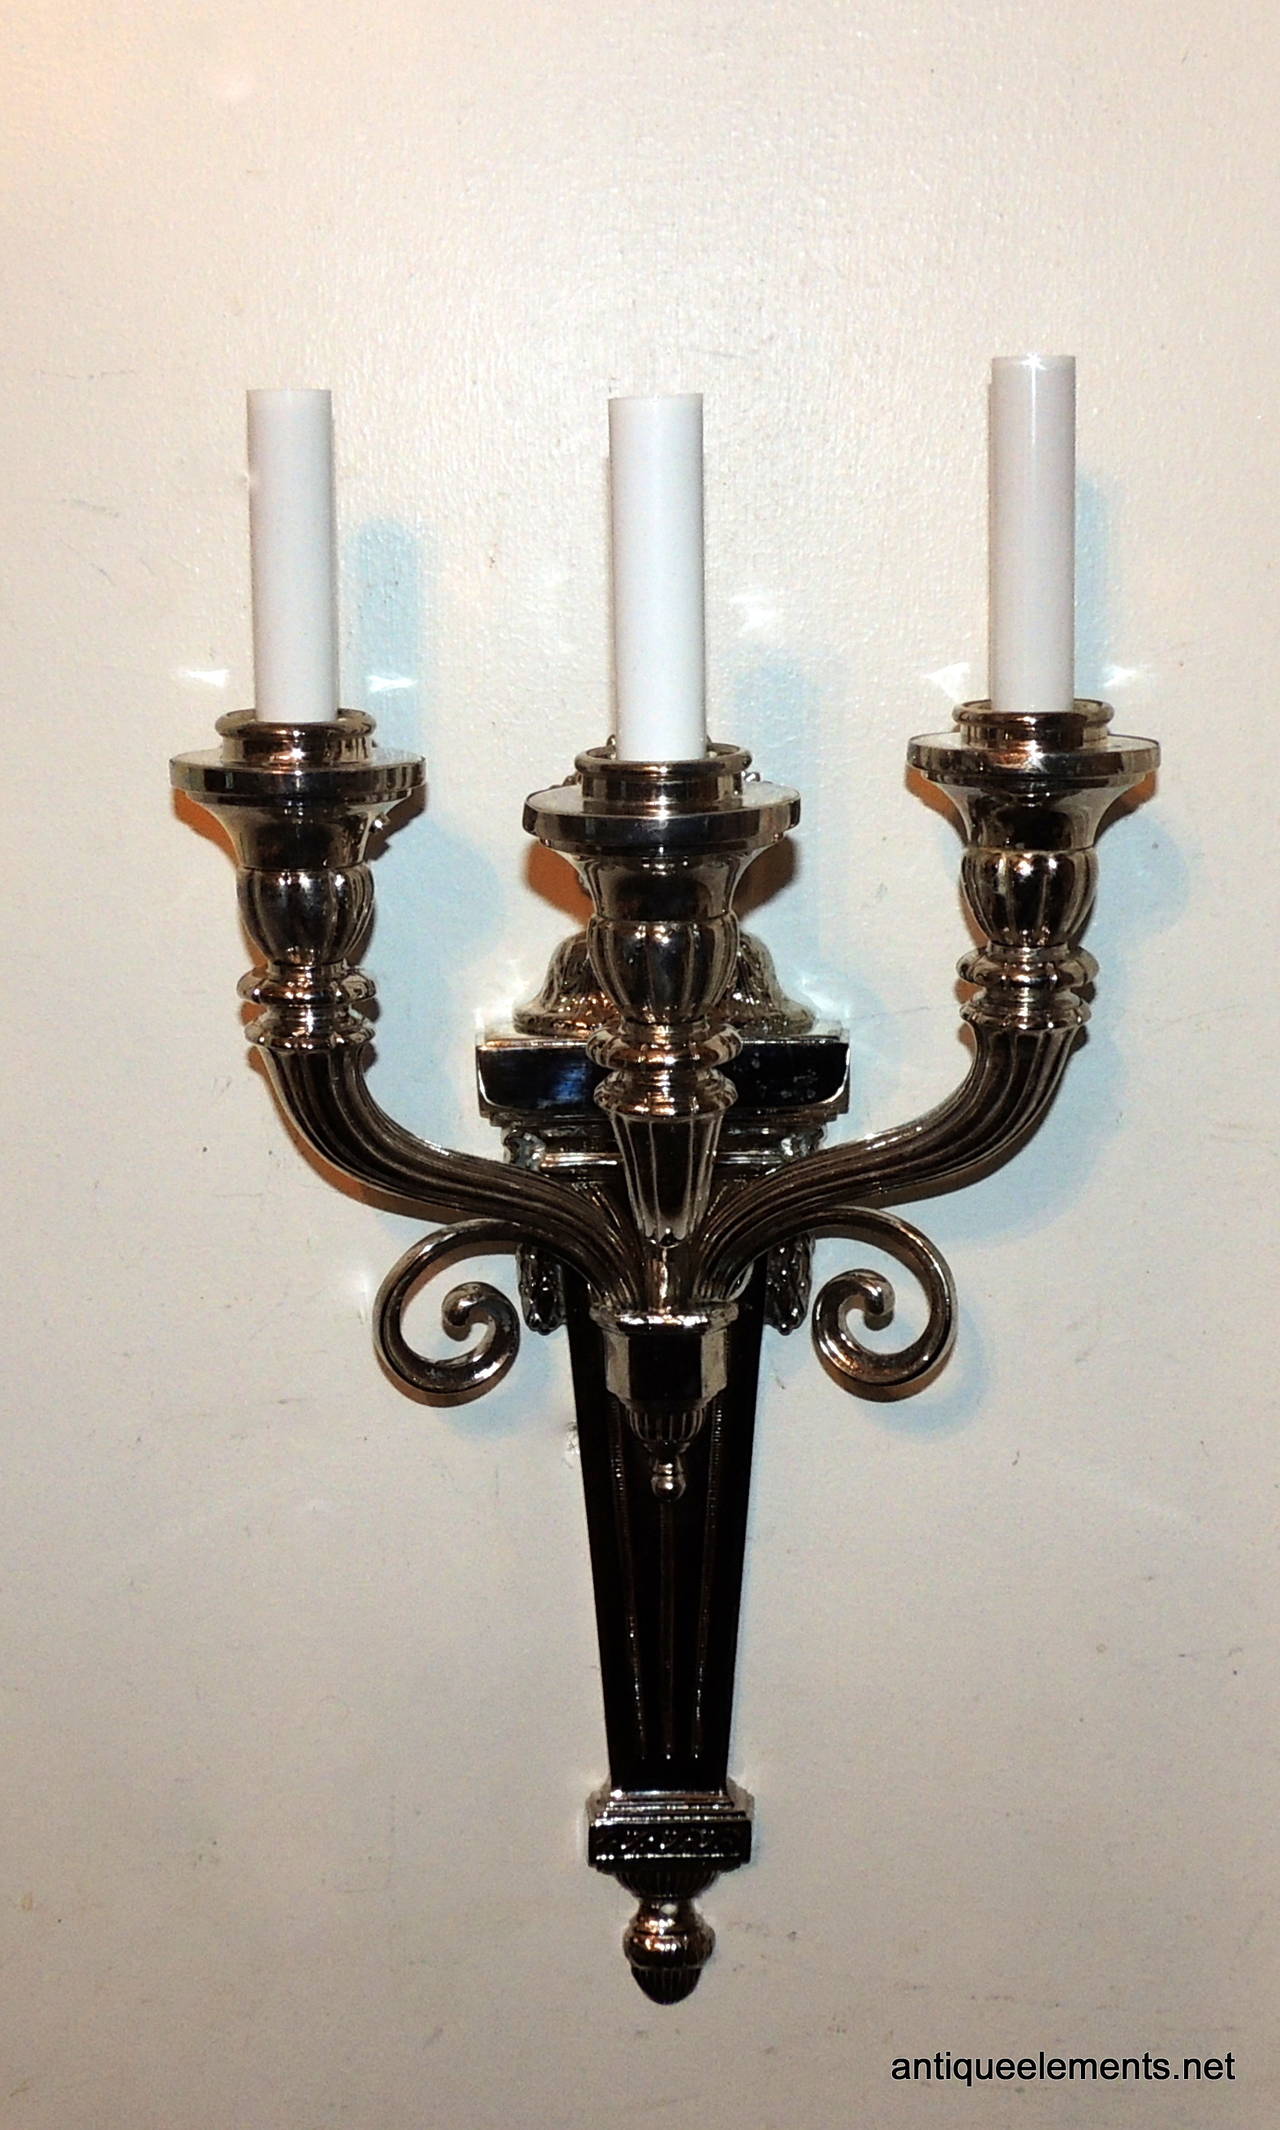 Neoclassical Nickel-Plated Three-Arm Sconces Attributed to Caldwell In Good Condition For Sale In Roslyn, NY